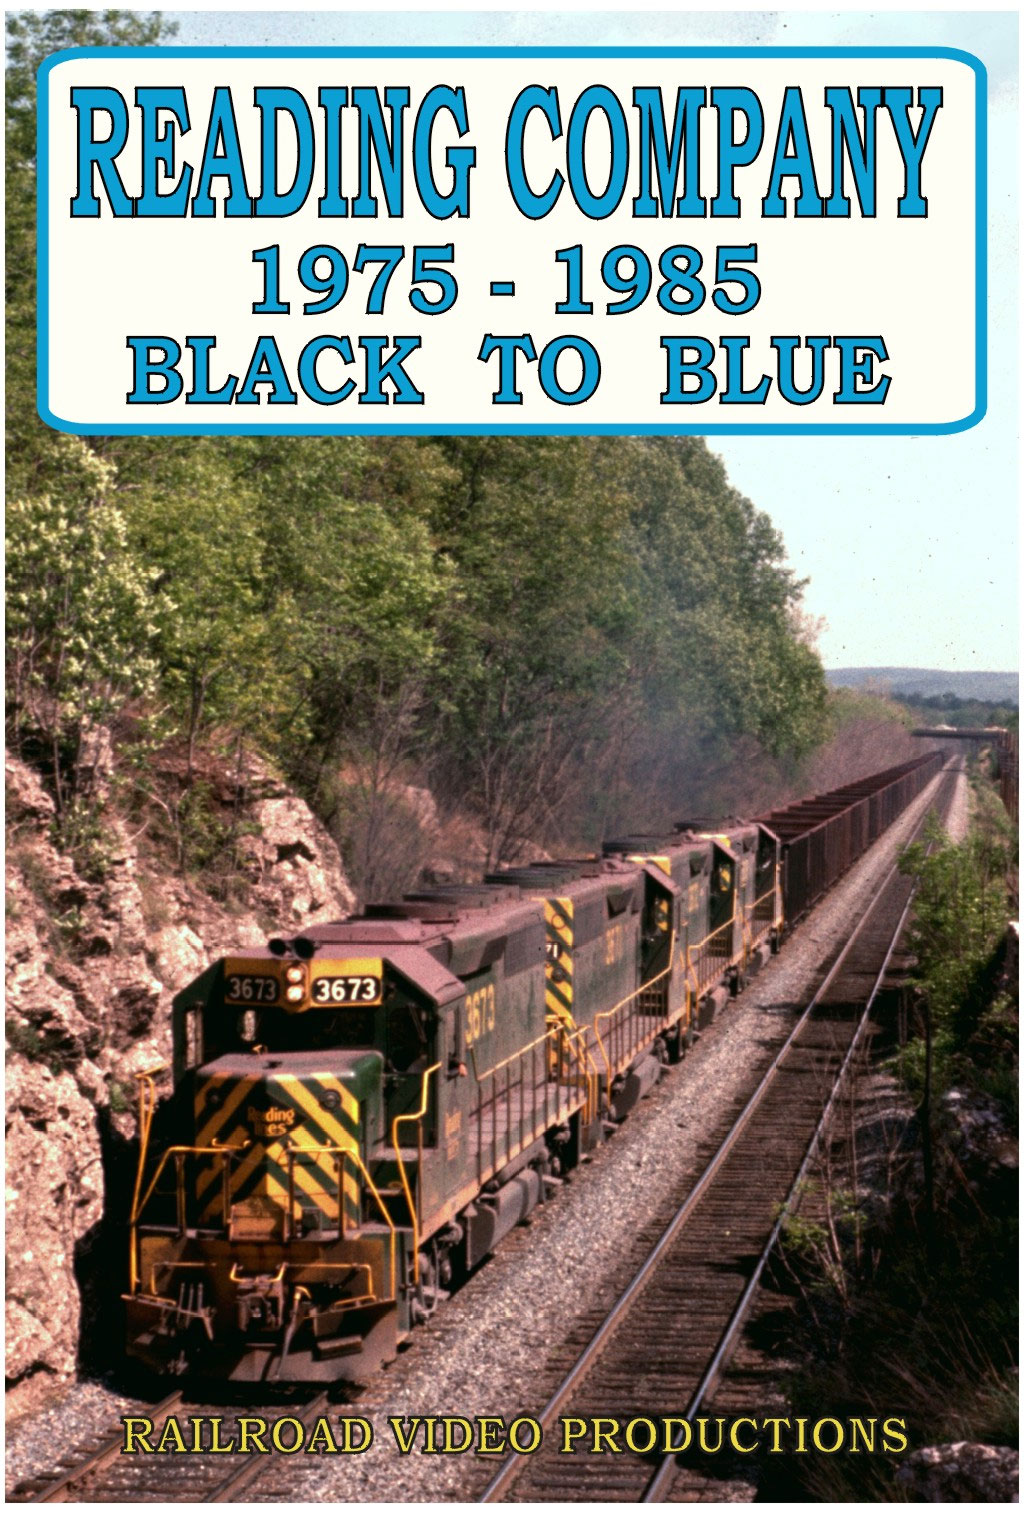 Reading Company 1975-1985 Black to Blue DVD Railroad Video Productions RVP219D